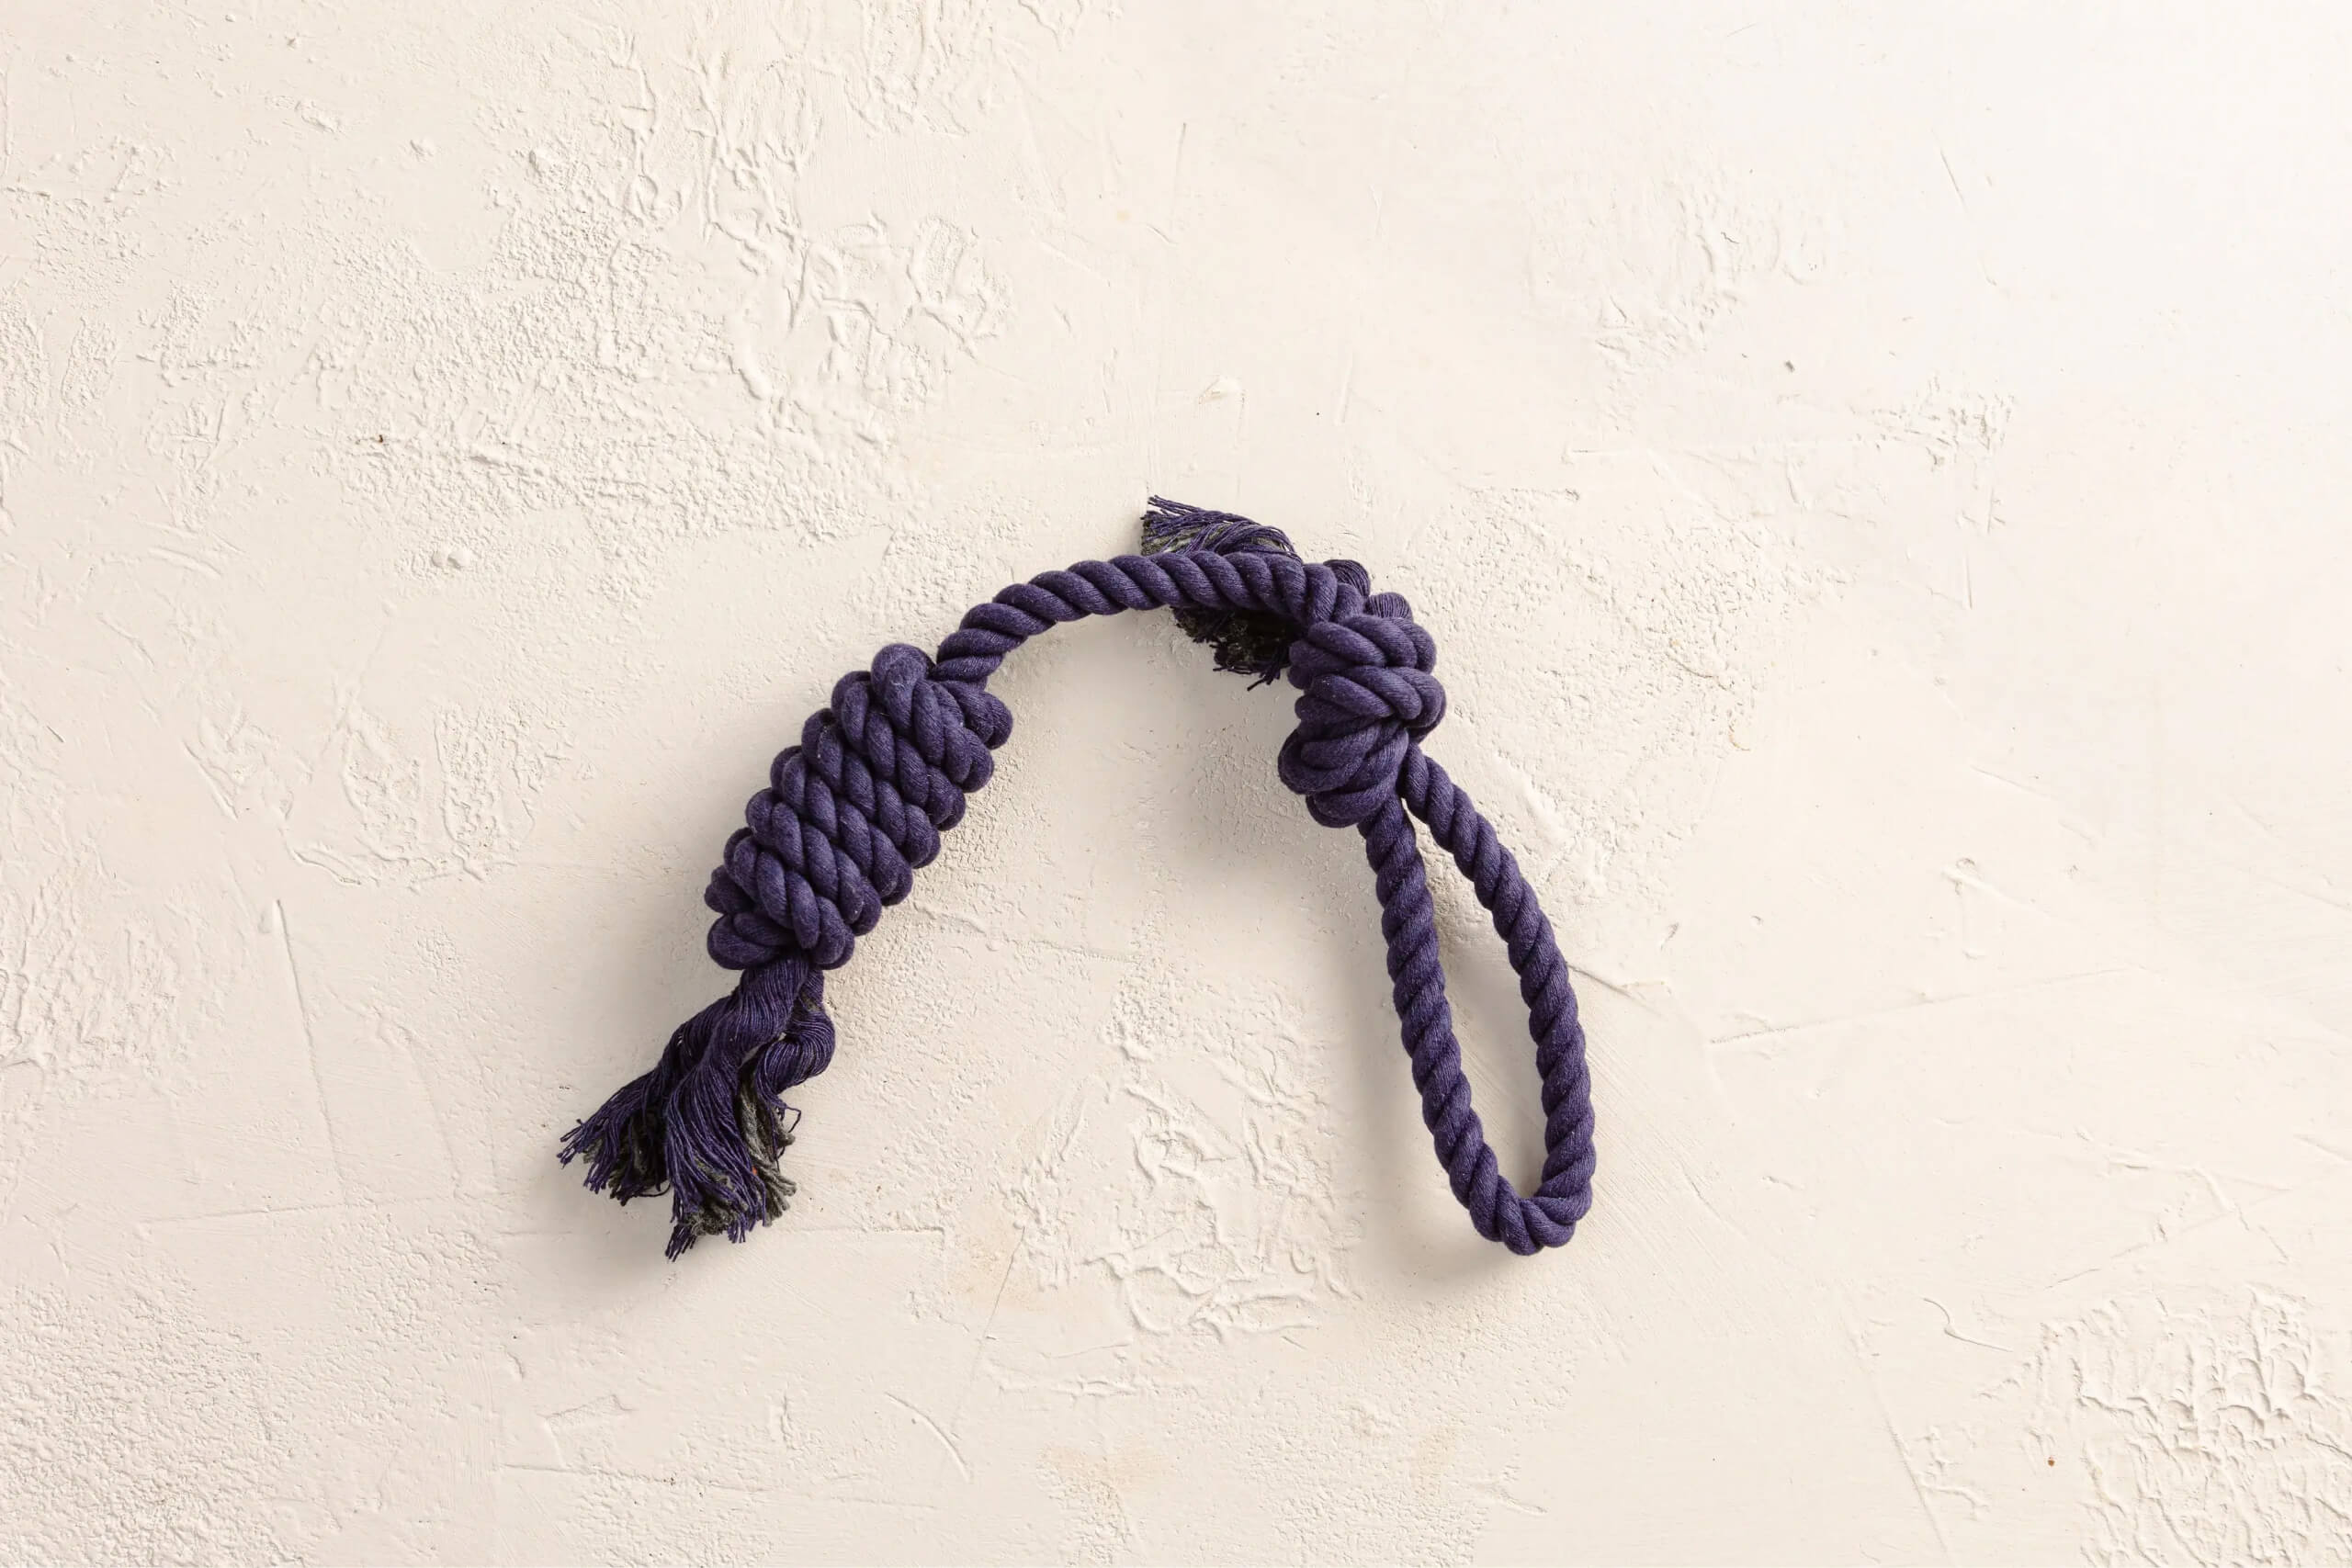 An image of The Chaser dog rope toy